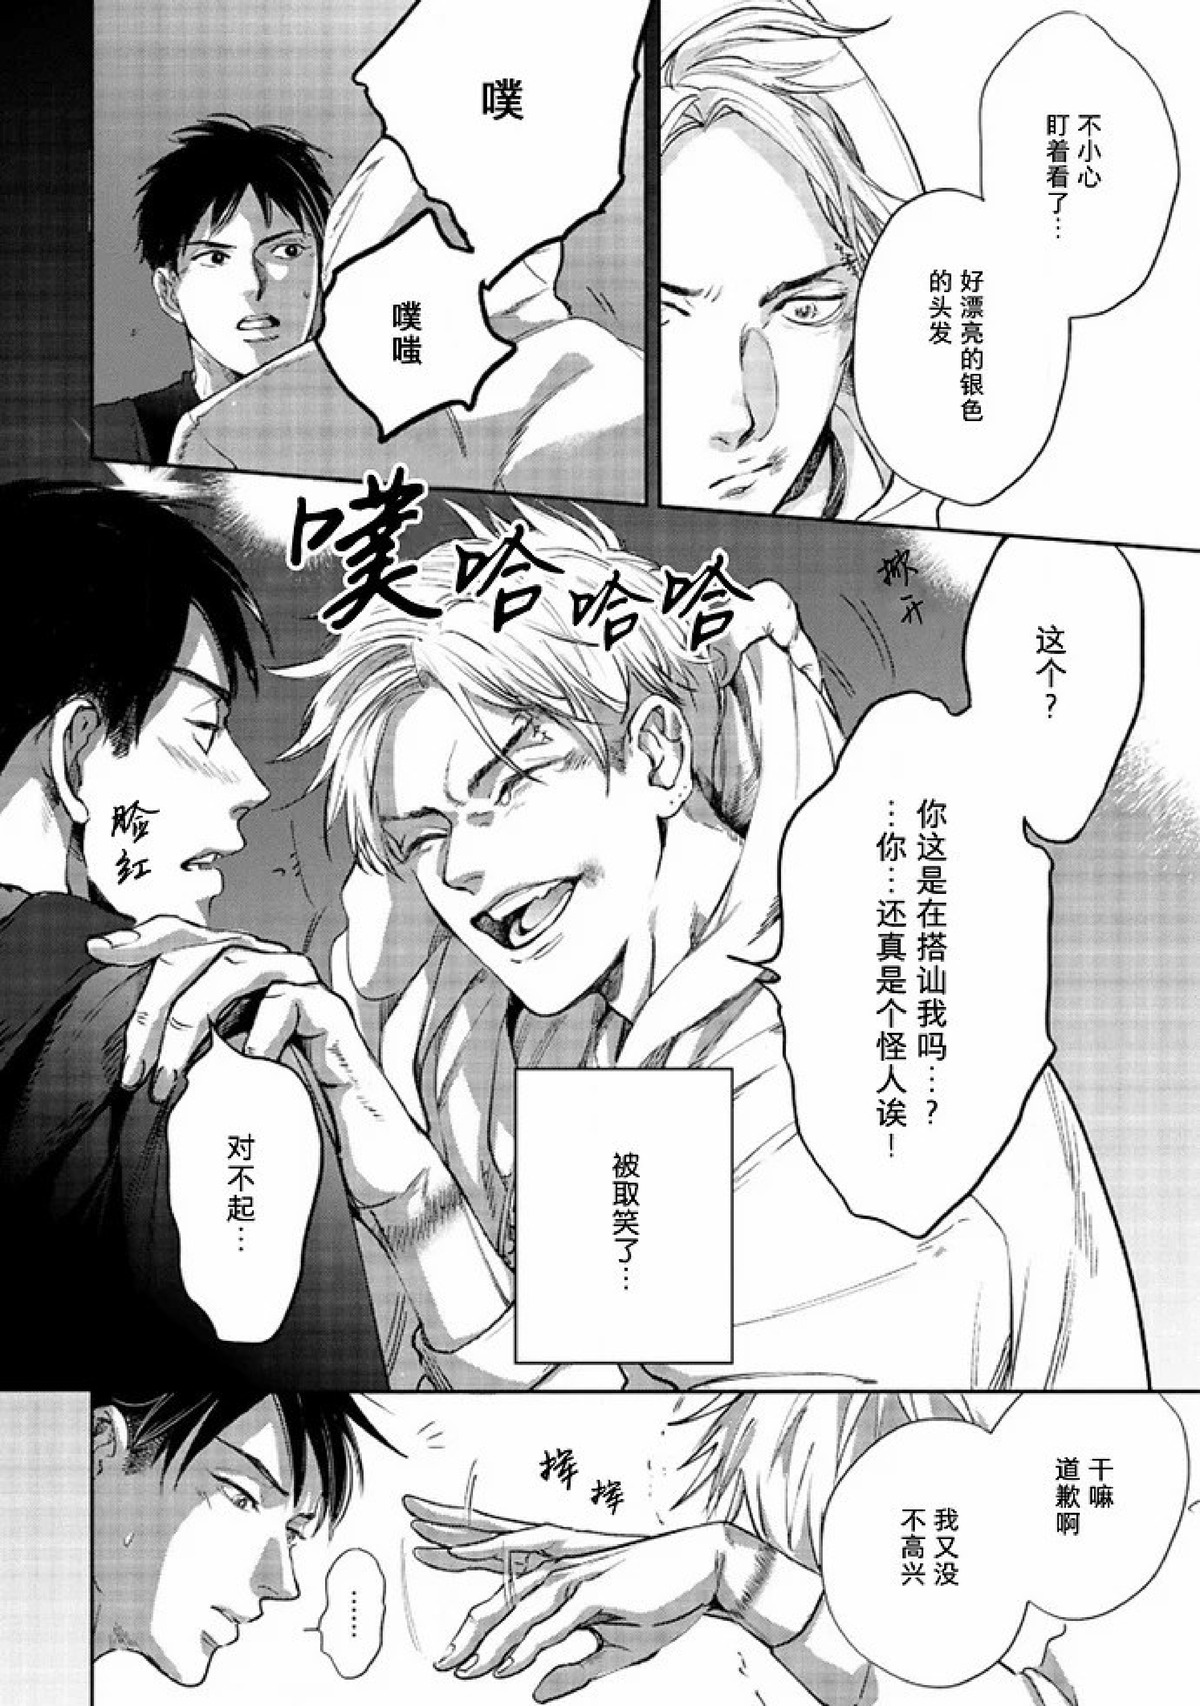 【Two sides of the same coin[耽美]】漫画-（上卷01-02）章节漫画下拉式图片-36.jpg